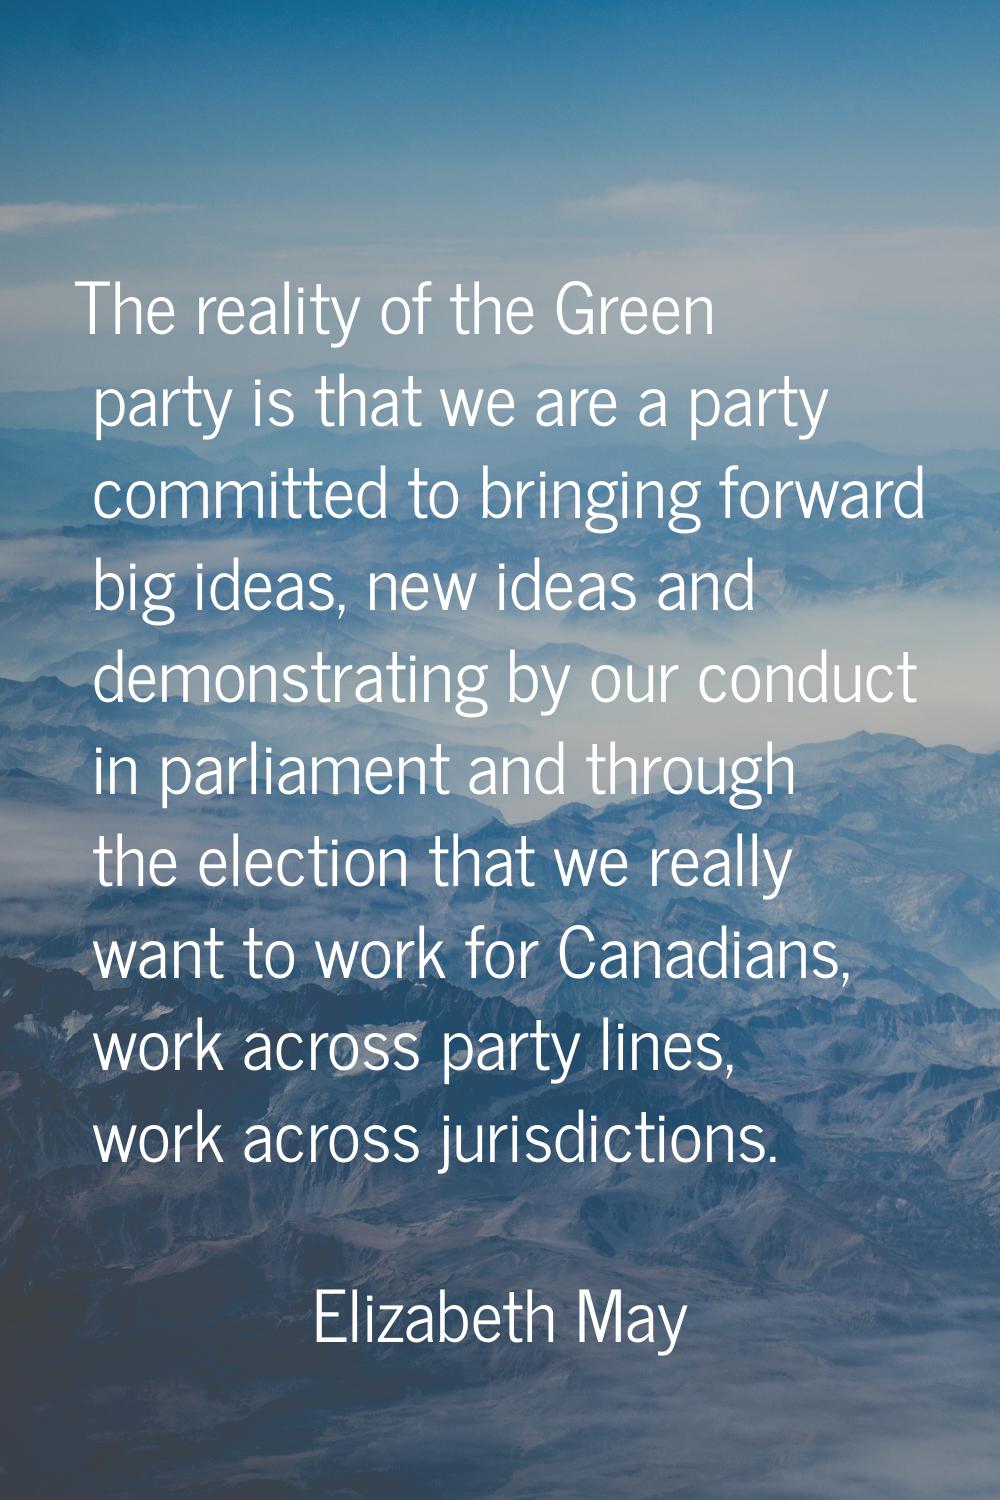 The reality of the Green party is that we are a party committed to bringing forward big ideas, new 